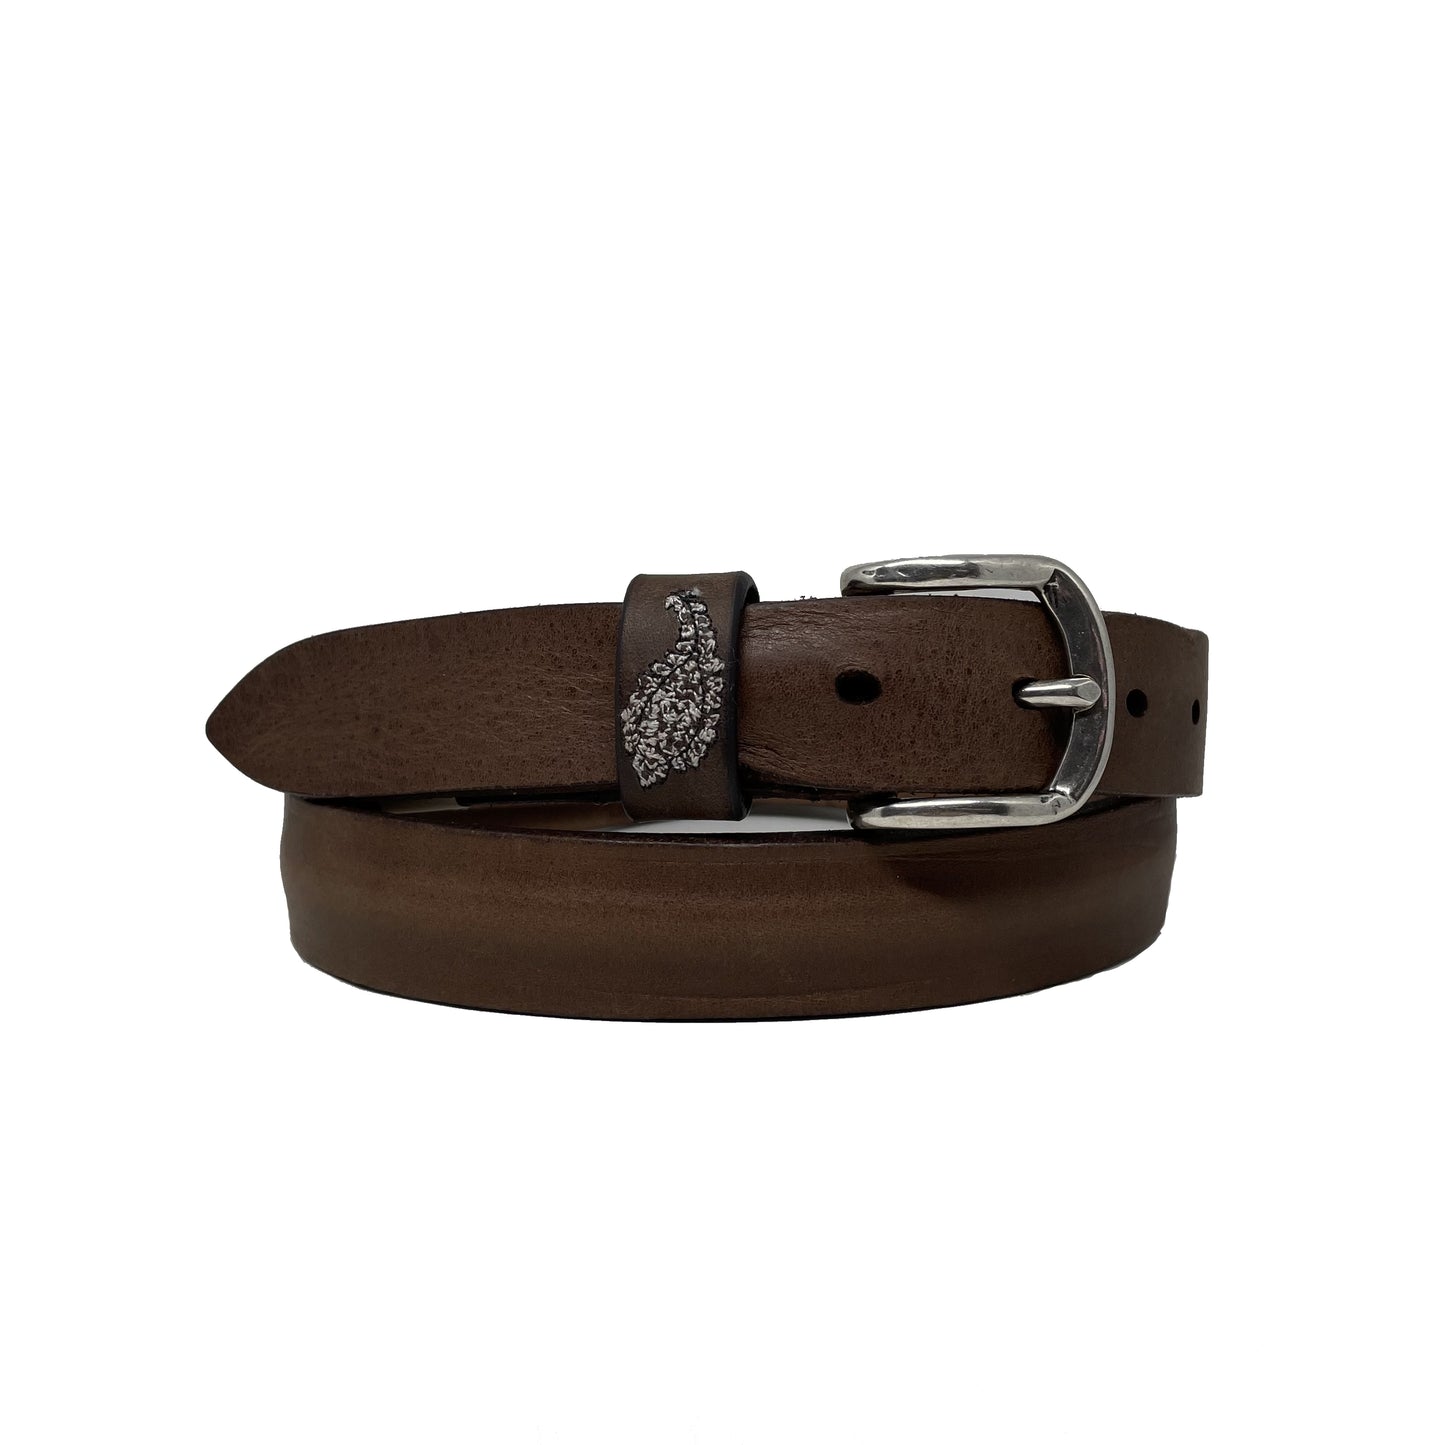 Vintage Leather Belt With Embroidered Loops